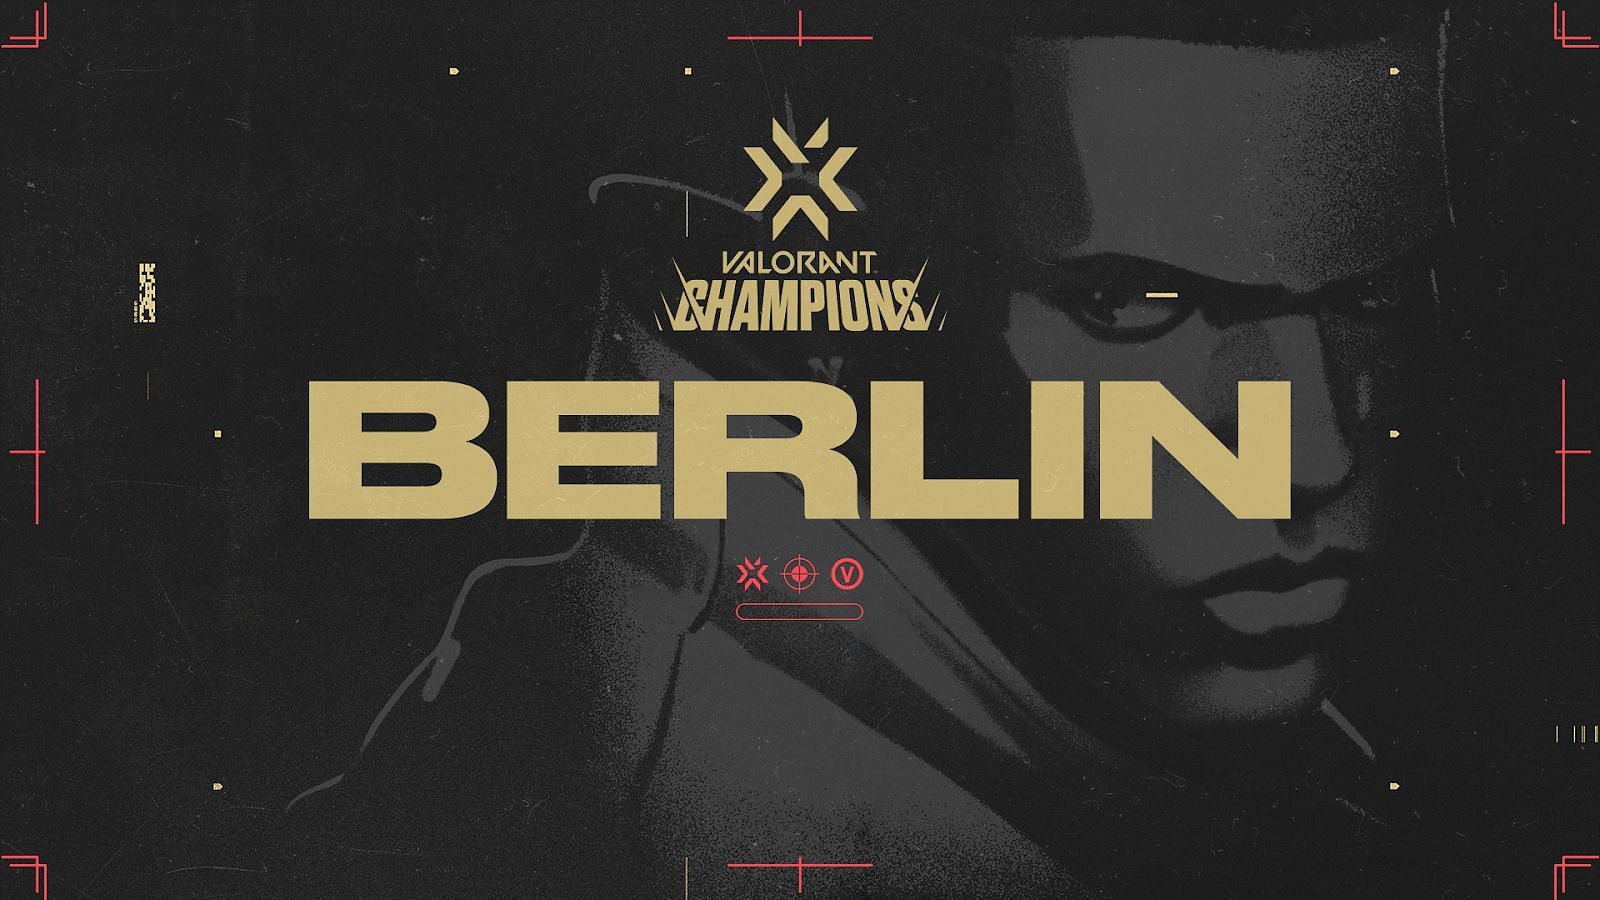 Valorant Champions 2021 Berlin kicks off on December 1 (Image by Riot Games)